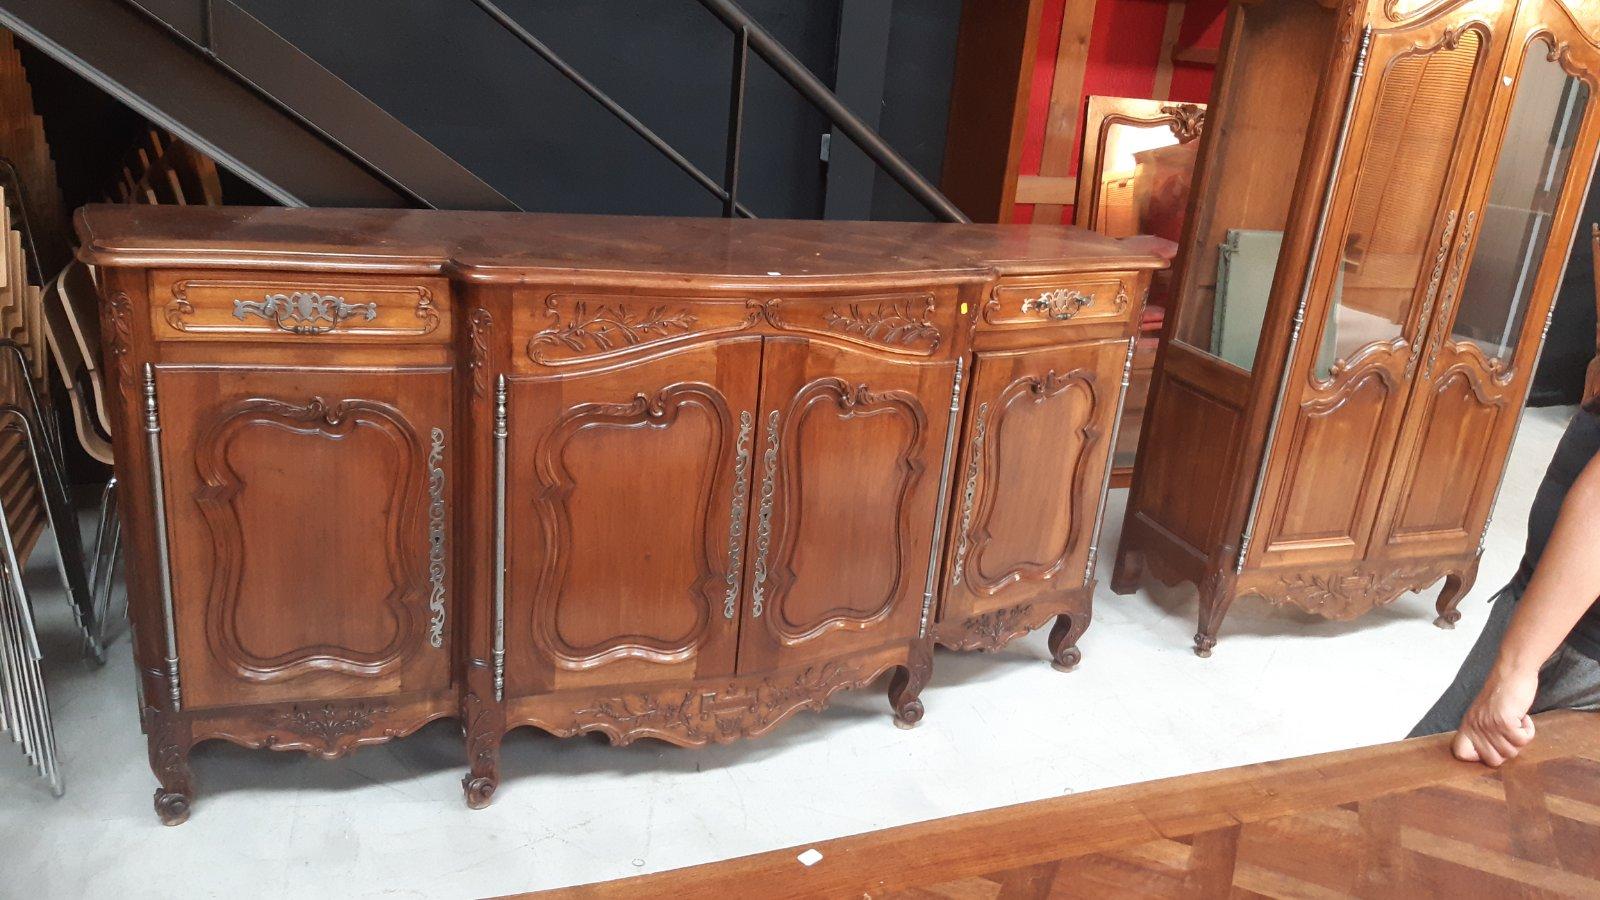 A beautiful antique French Louis XV style buffet, circa 1890.
Made of solid oak with luscious curves and carving. The marquetry top has a lively undulating shape across the front.
All four cabinet doors retain their original impressive iron hinges